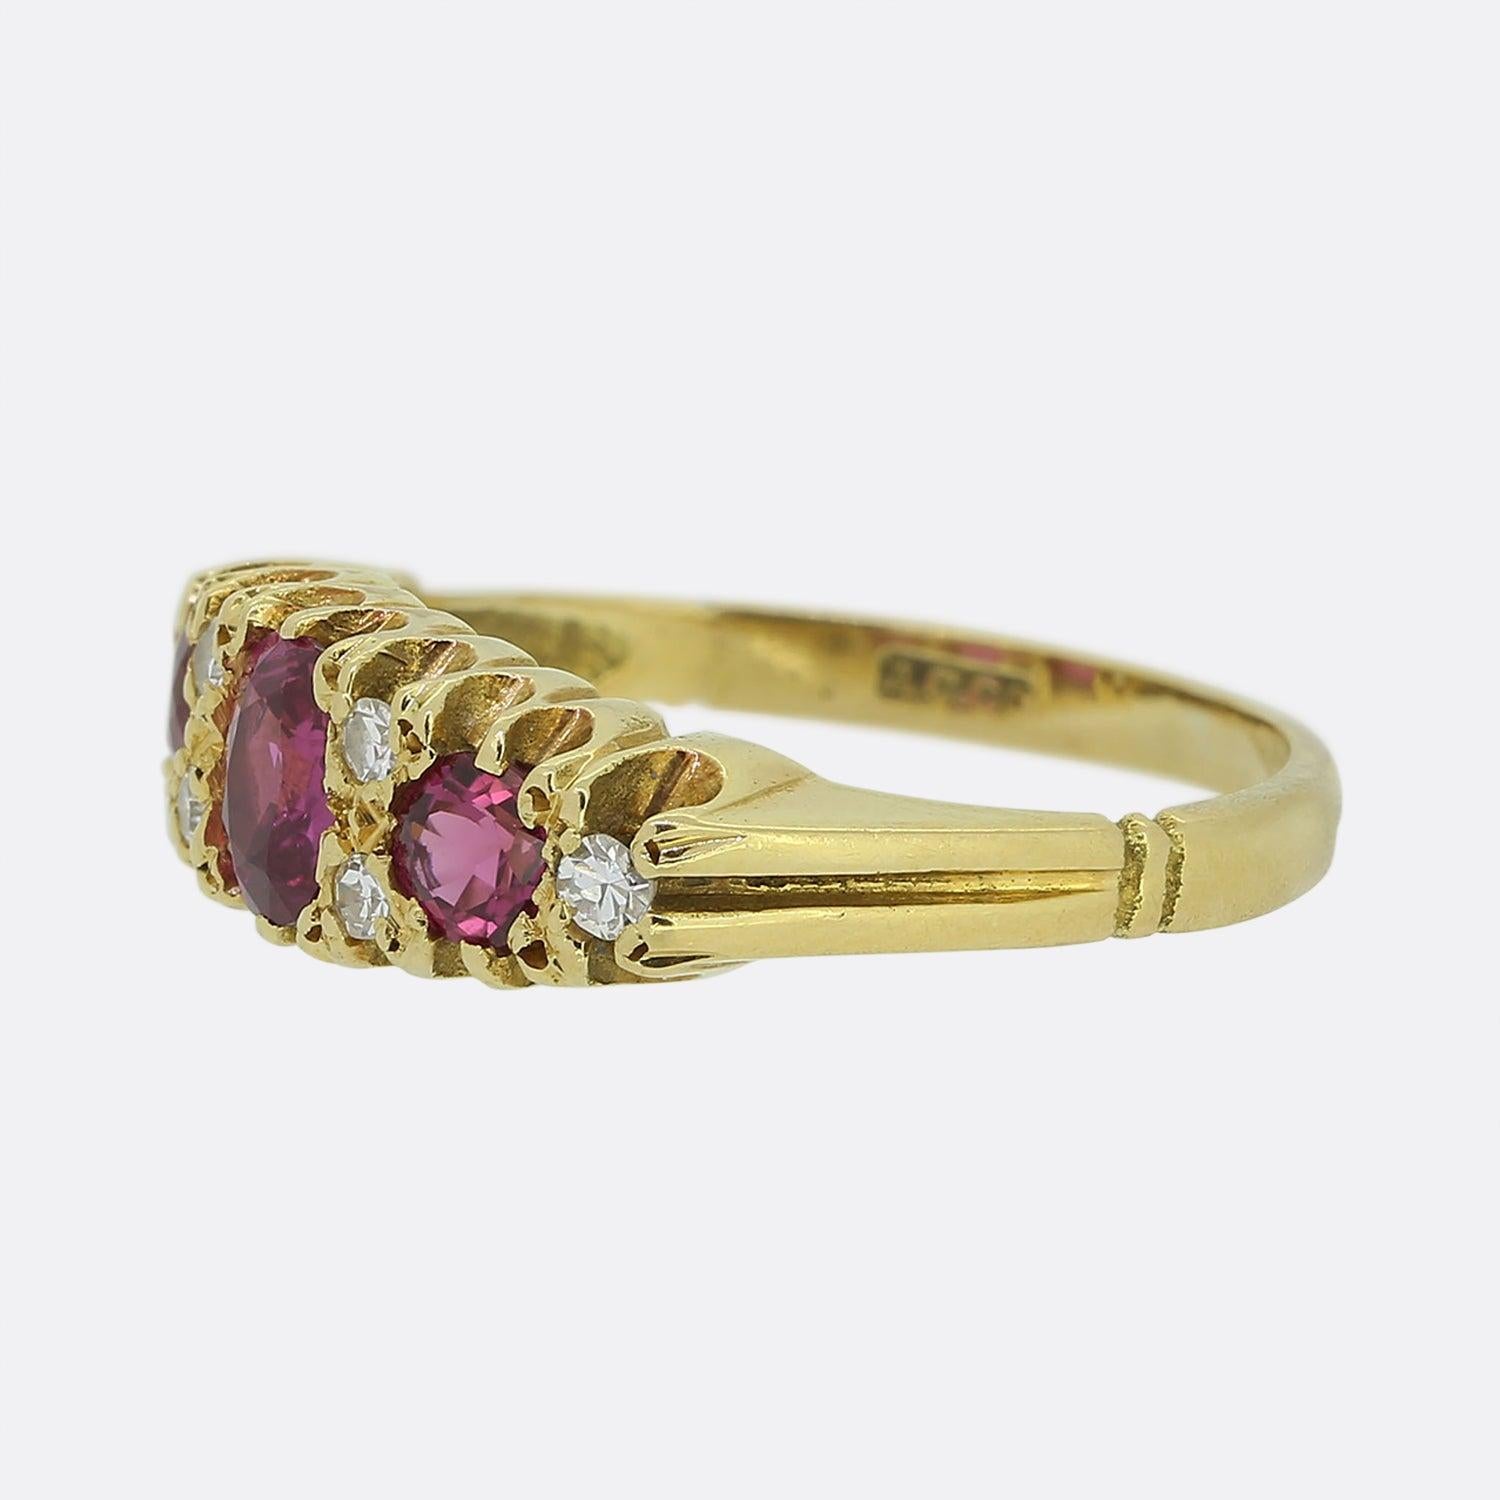 Here we have a classic styled three-stone ruby ring. This vintage piece showcases a single oval faceted ruby a the centre of the face which is flanked on either side by a single slightly smaller round shaped ruby. Each ruby exhibits a perfectly